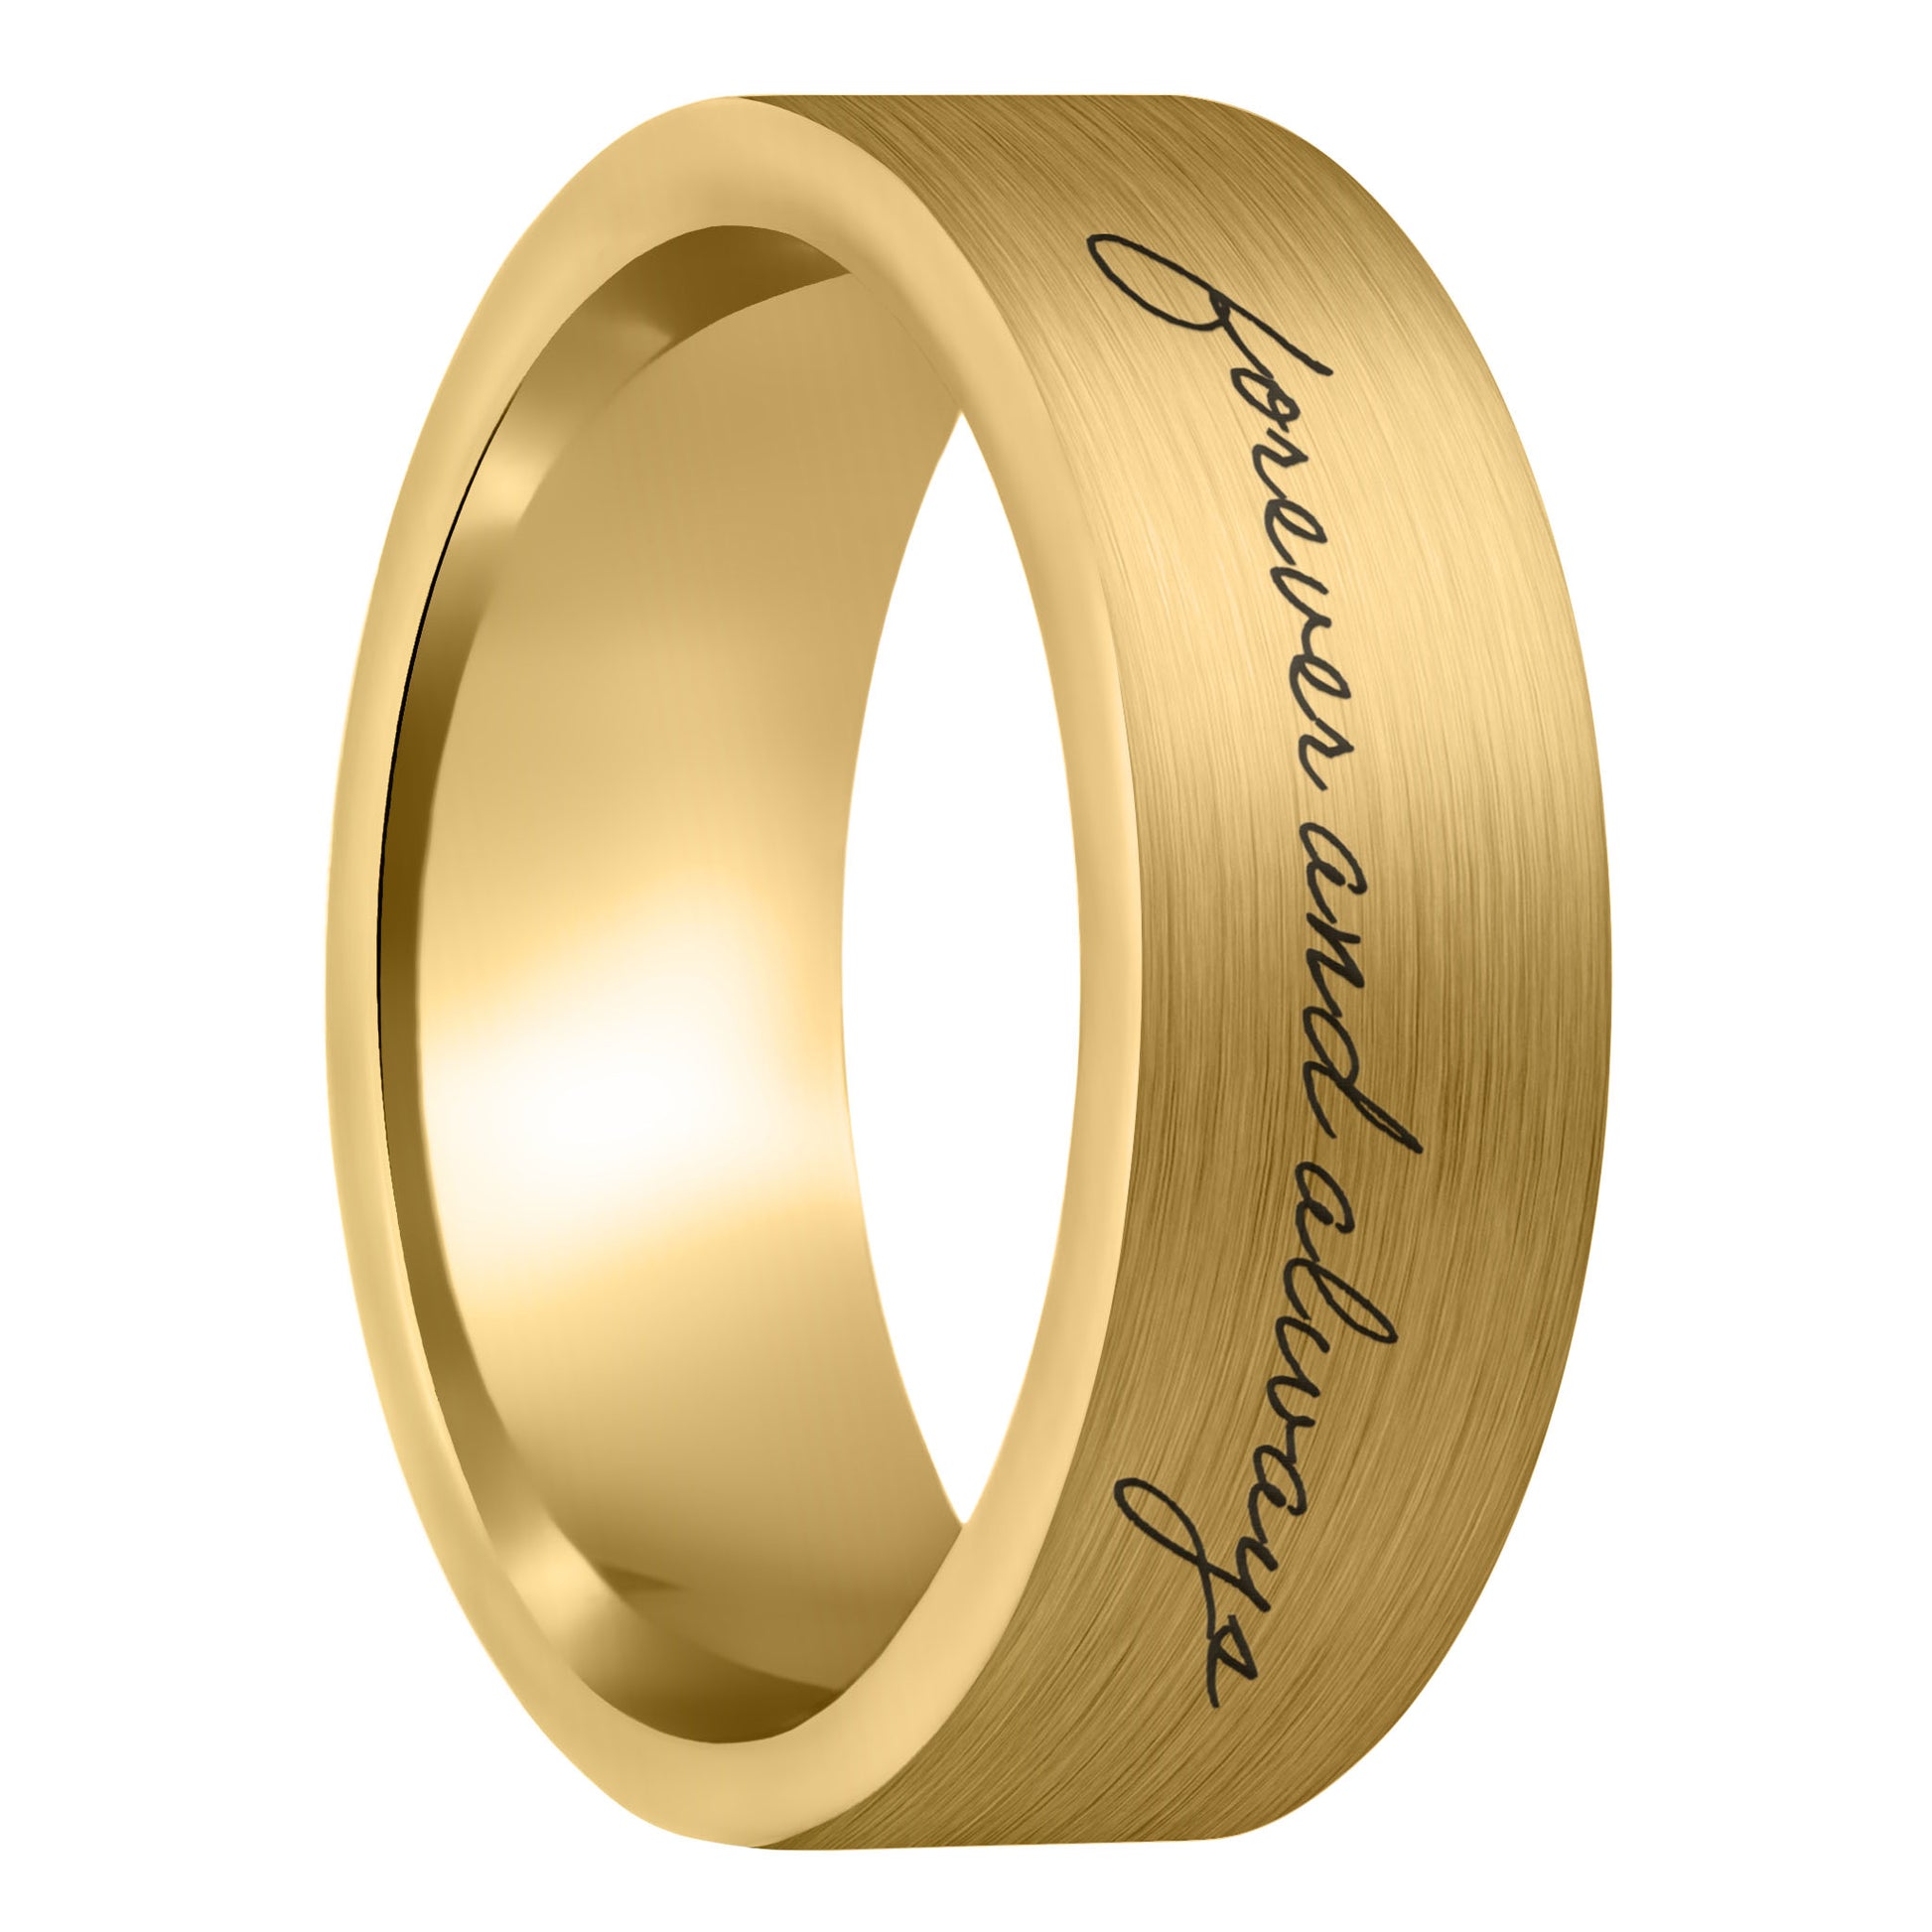 A custom handwriting brushed gold tungsten men's wedding band displayed on a plain white background.